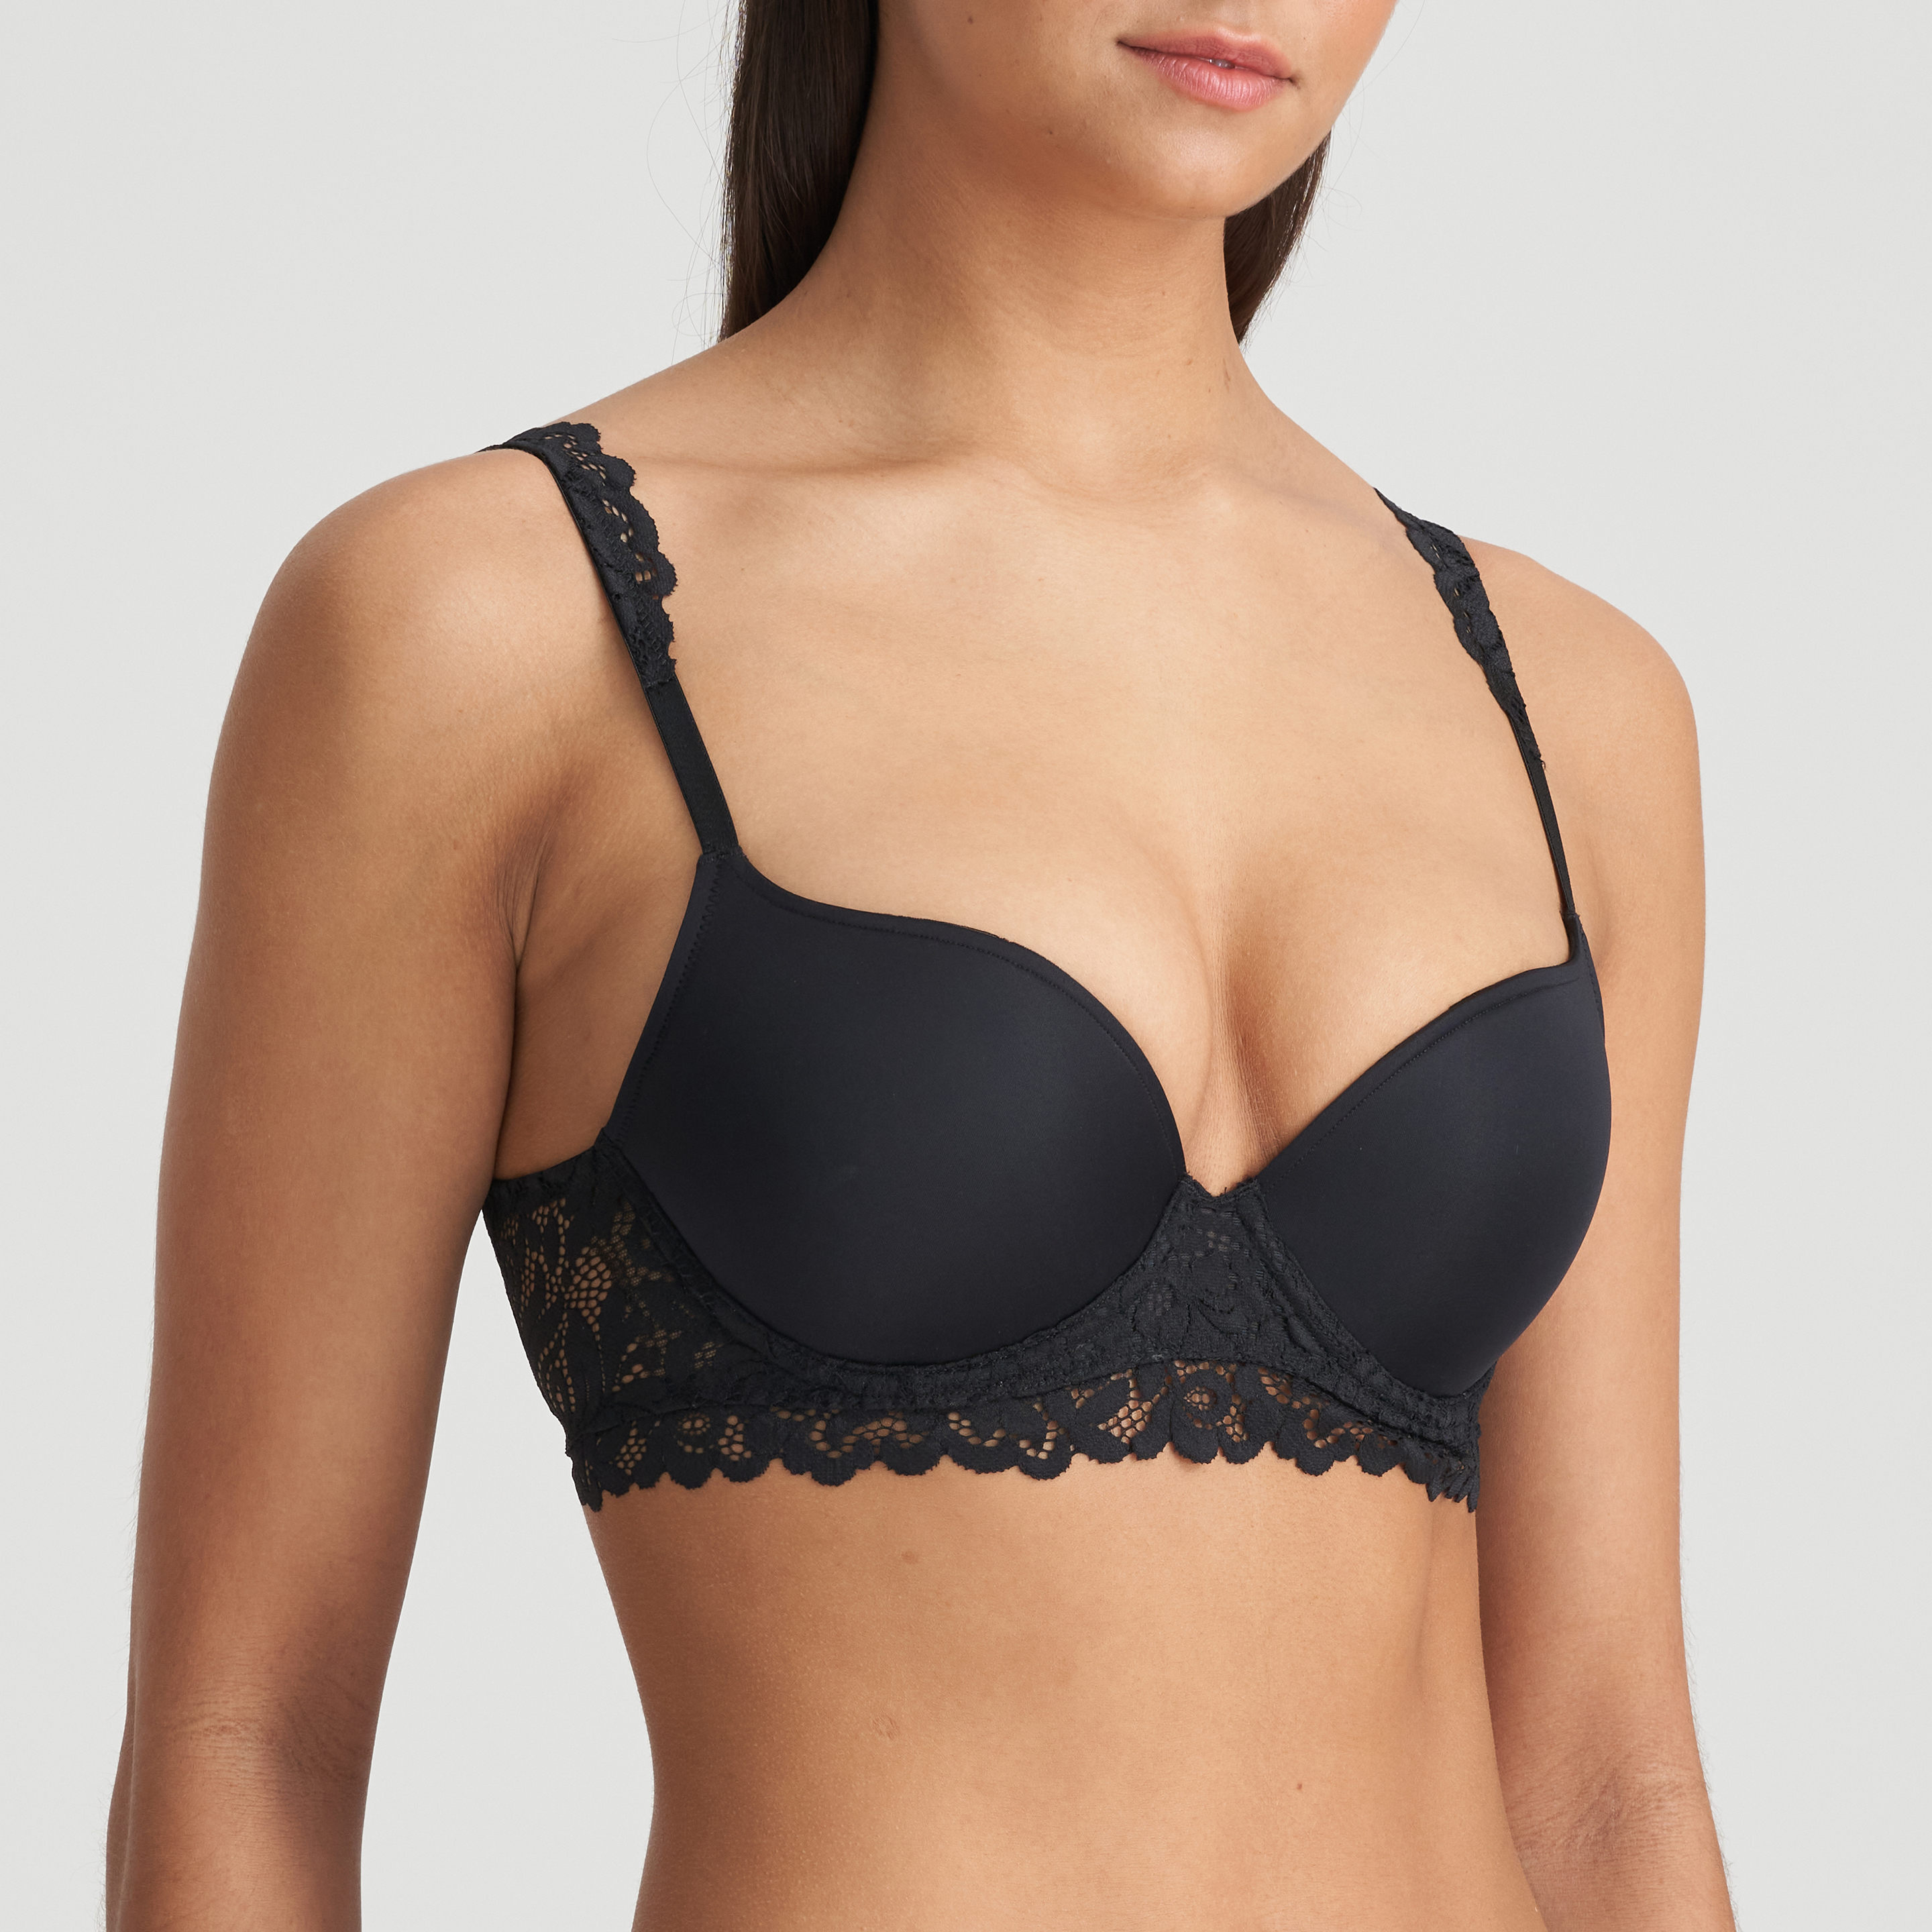 Marie Jo Avero Black Underwired Push Up Bra 32A moulded padded cups 0100417